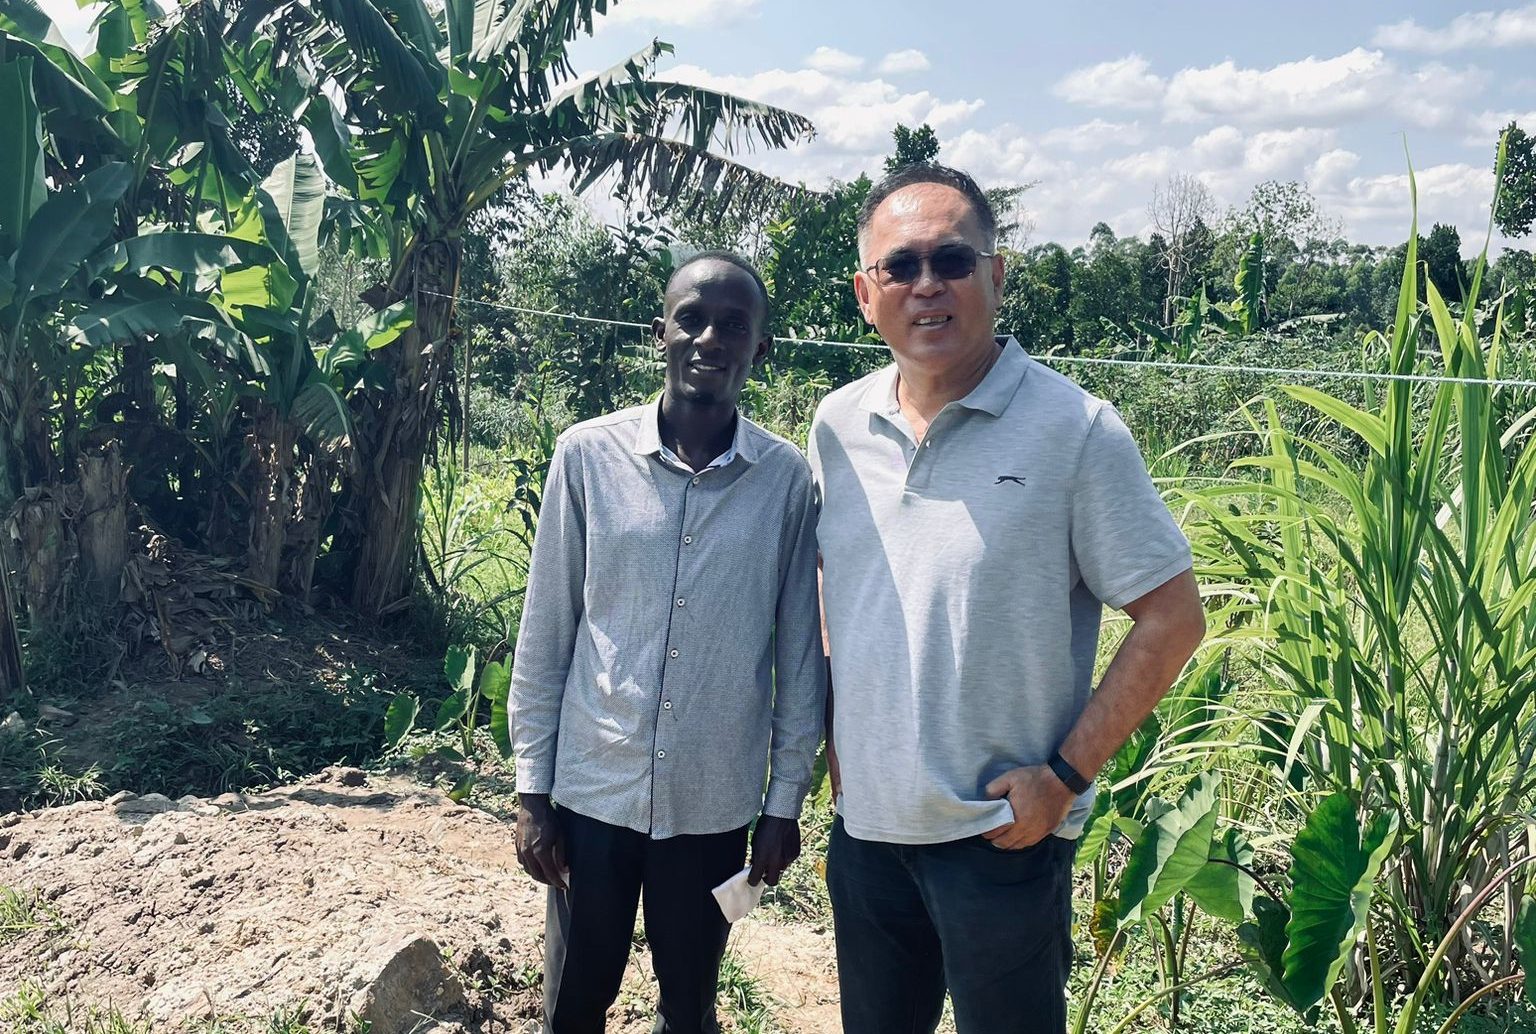 When Pastor Paul Wong (right) decided to sponsor a water filtration system to Uganda, he did not expect his gift to bring about great spiritual growth in the area. All photos courtesy of Pastor Paul Wong.